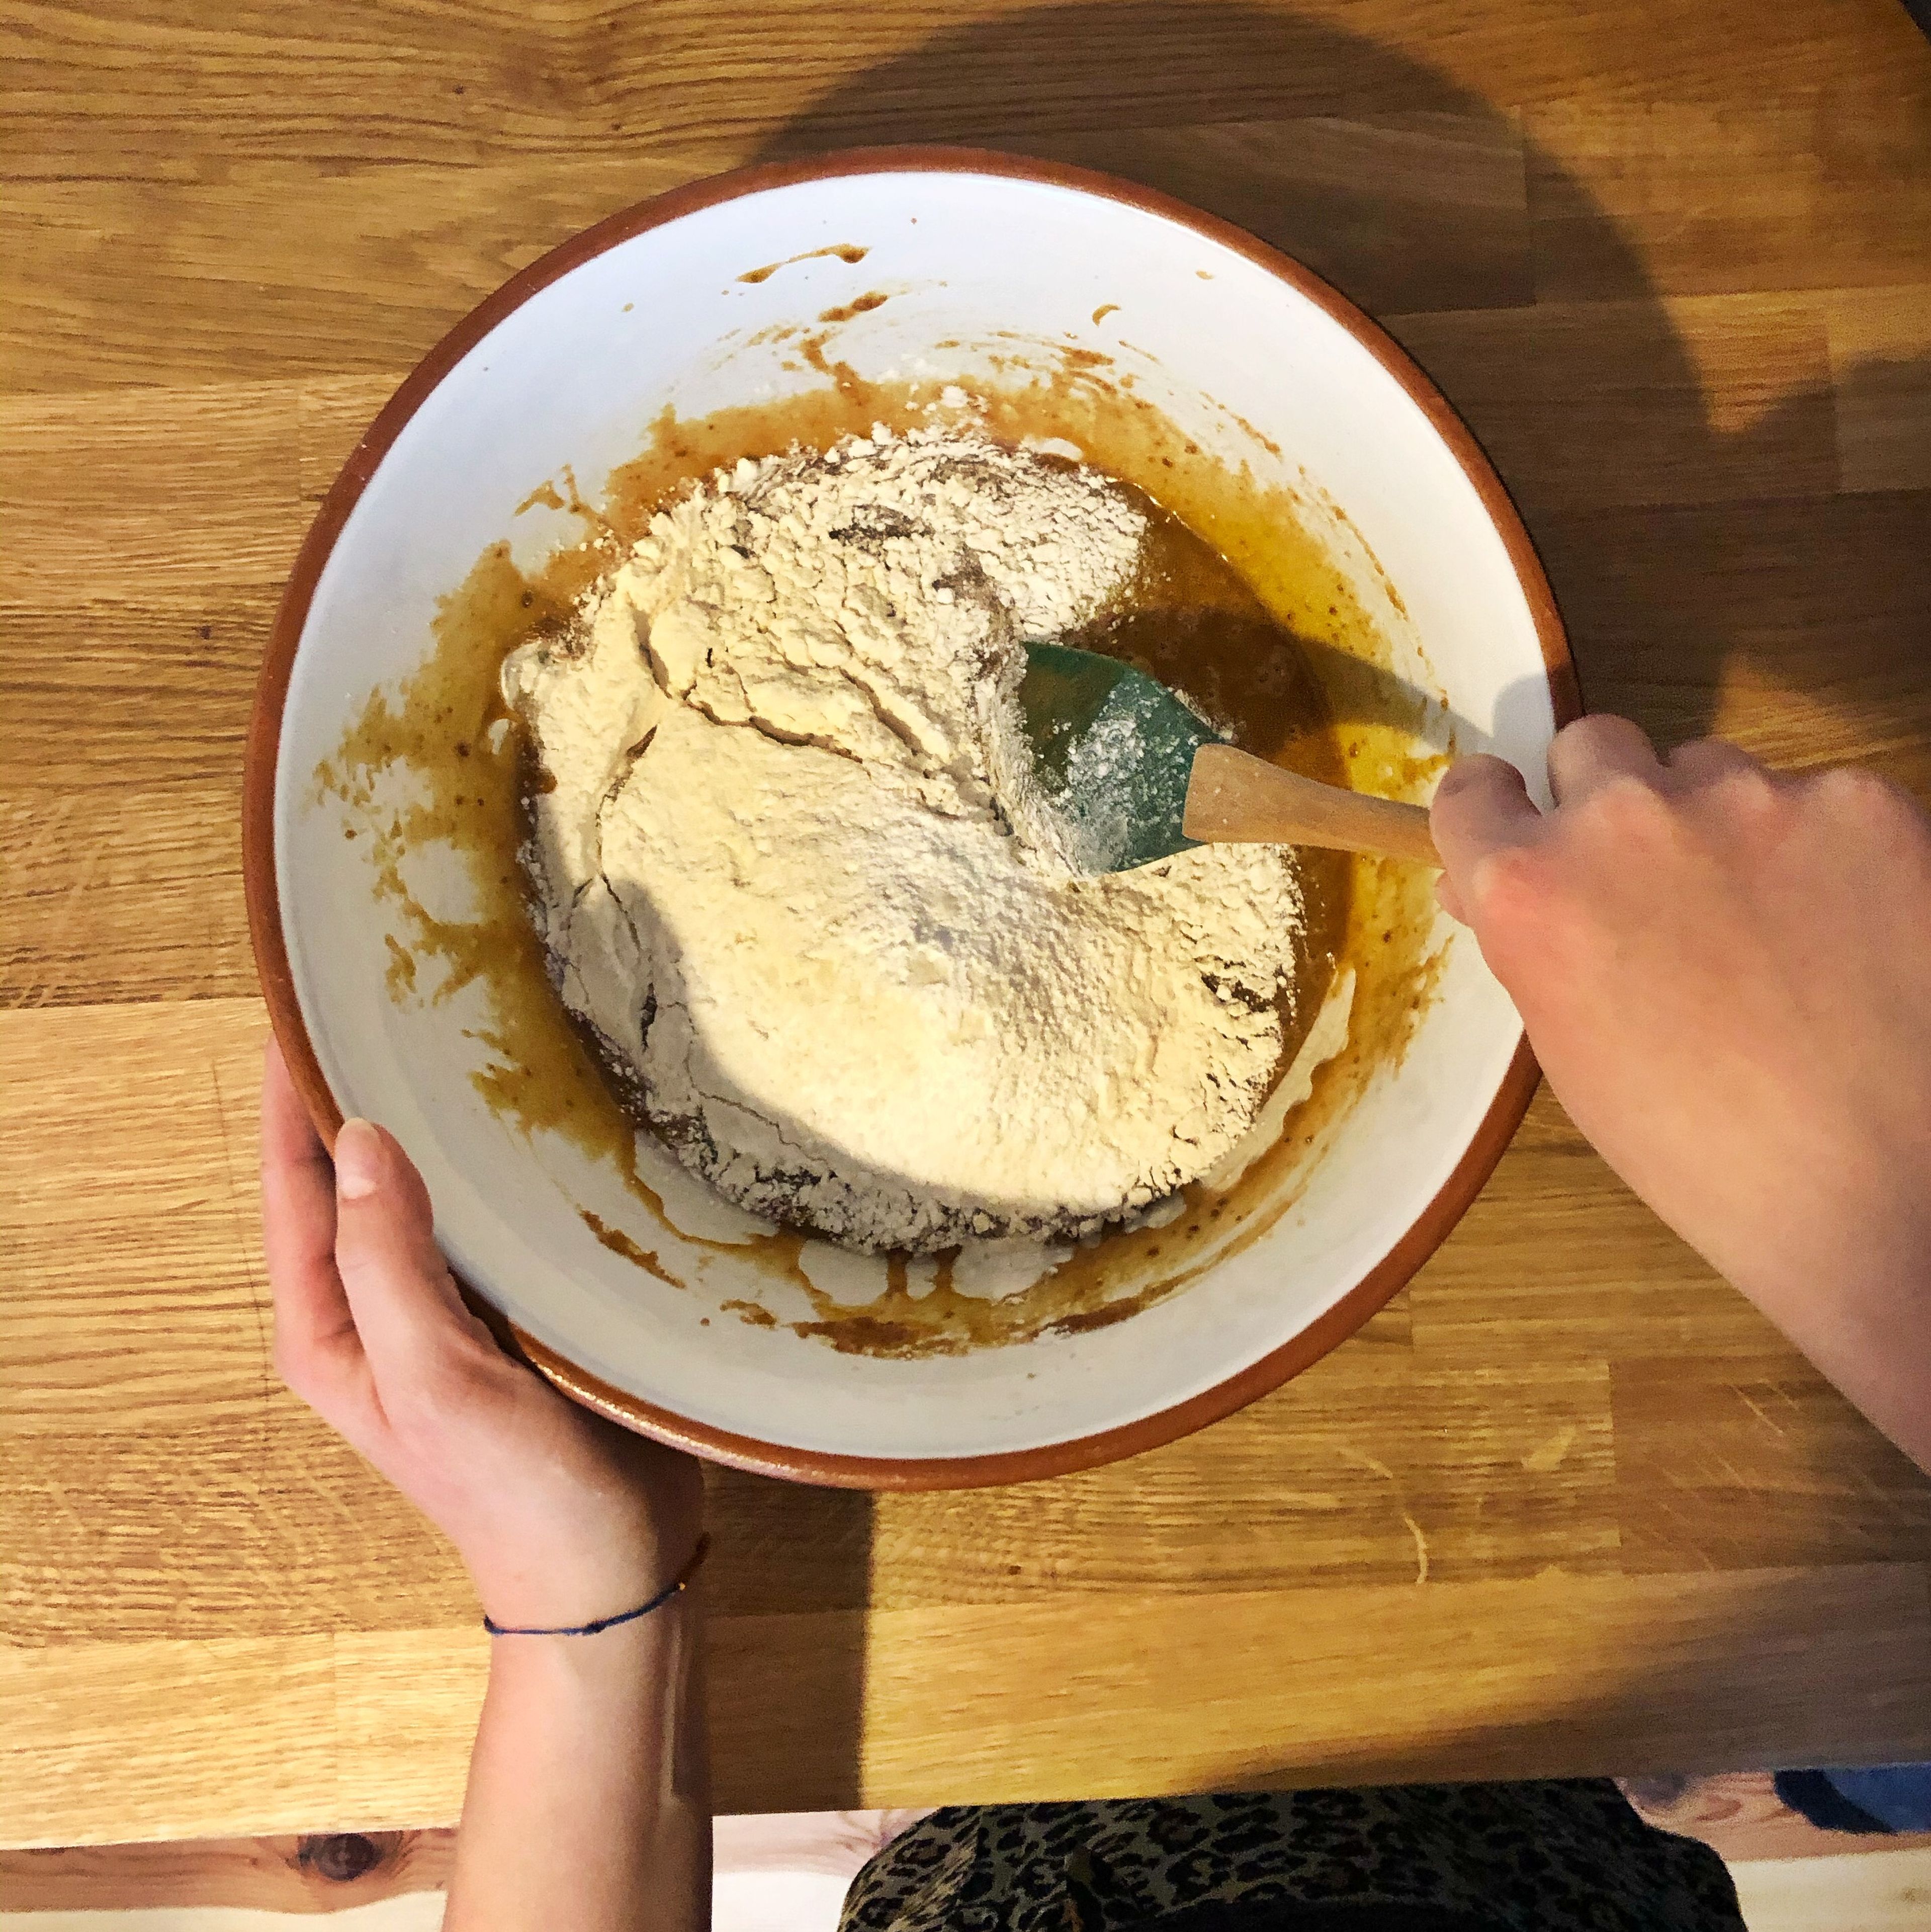 Preheat oven to 190°C/375°F. Mix brown butter, brown sugar, sugar, and vanilla extract in a large bowl. Add egg and egg yolk and stir to combine. Add flour, baking powder, baking soda, and salt and keep stirring until a smooth dough forms.